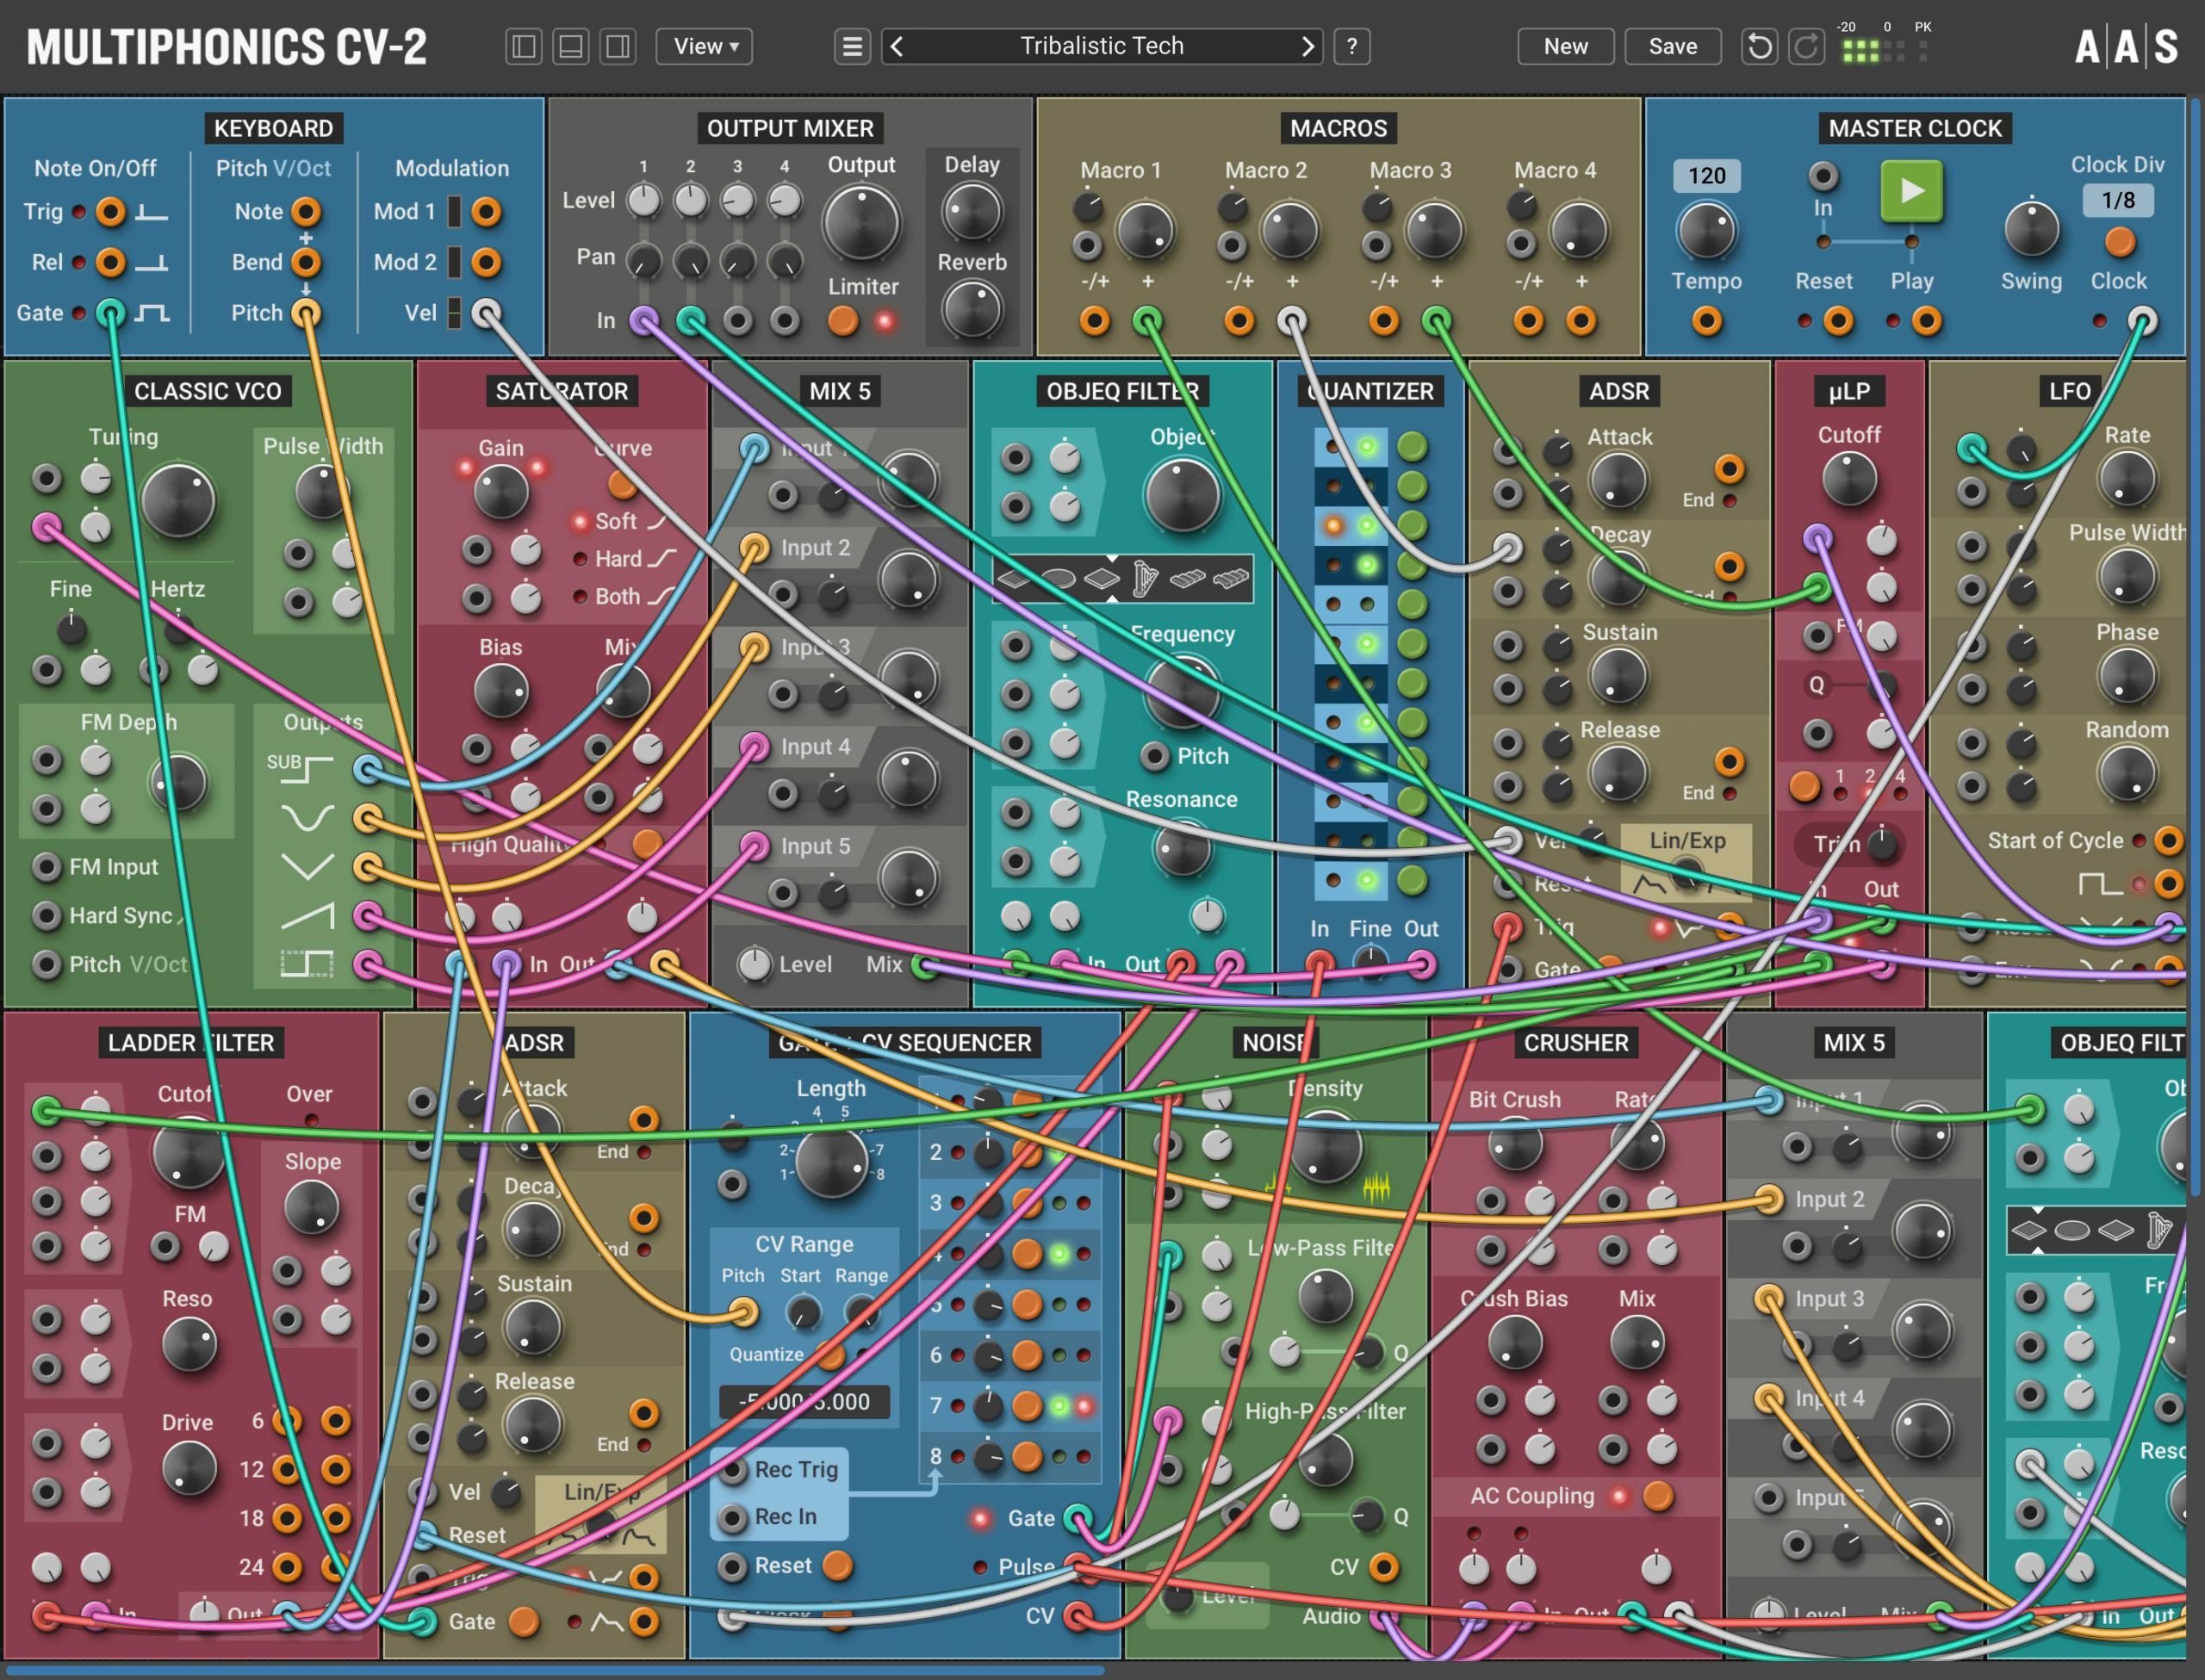 AAS Multiphonics CV-2: Modular synth and FX excellence